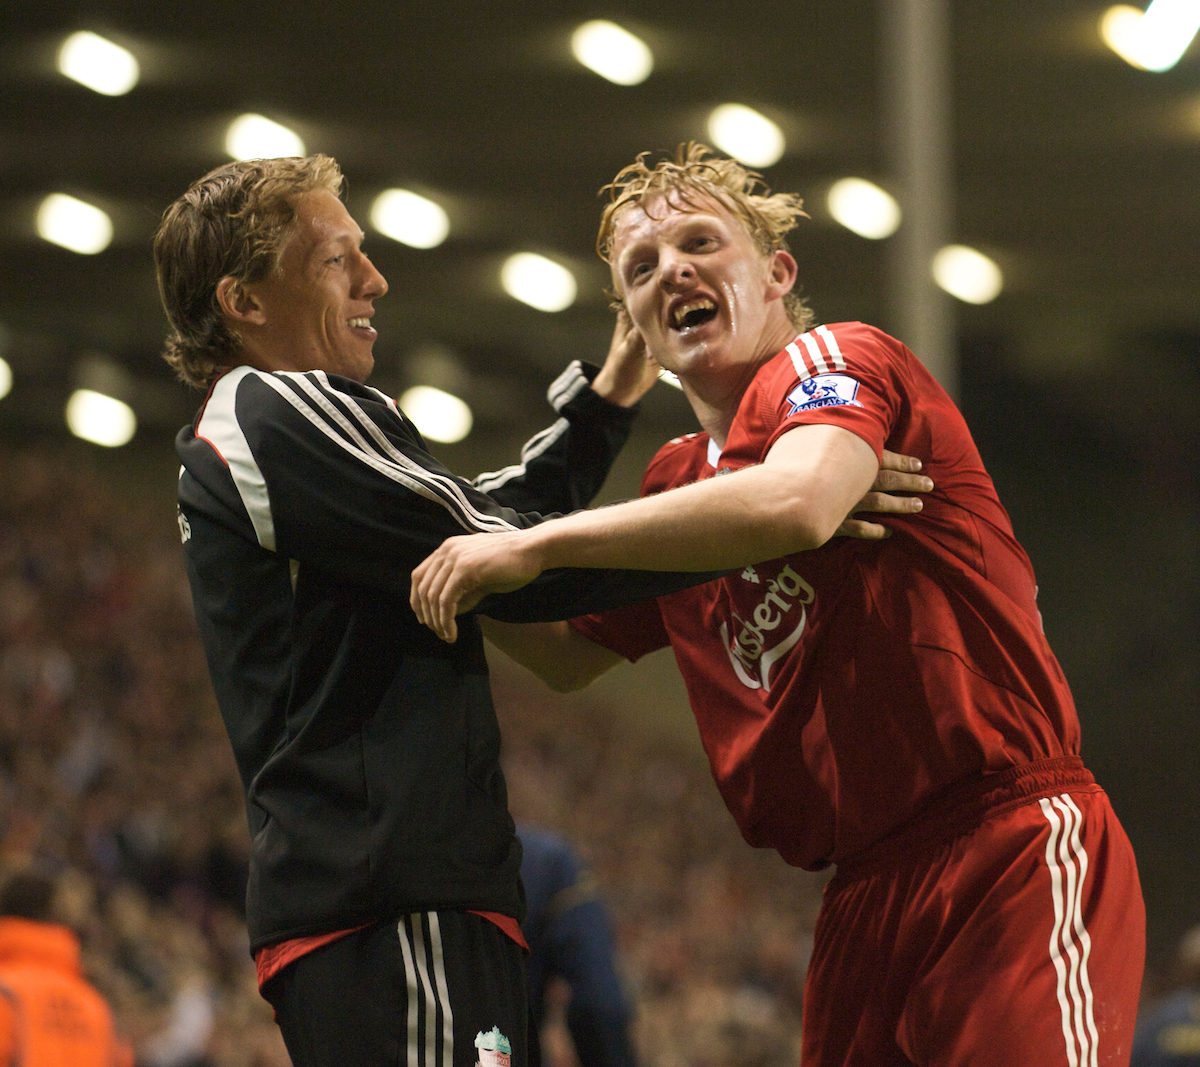 Liverpool's Dirk Kuyt celebrates Yossi Benayoun's goal to make the score 2-1 against Arsenal with team-mate Lucas Leiva during the Premiership match at Anfield